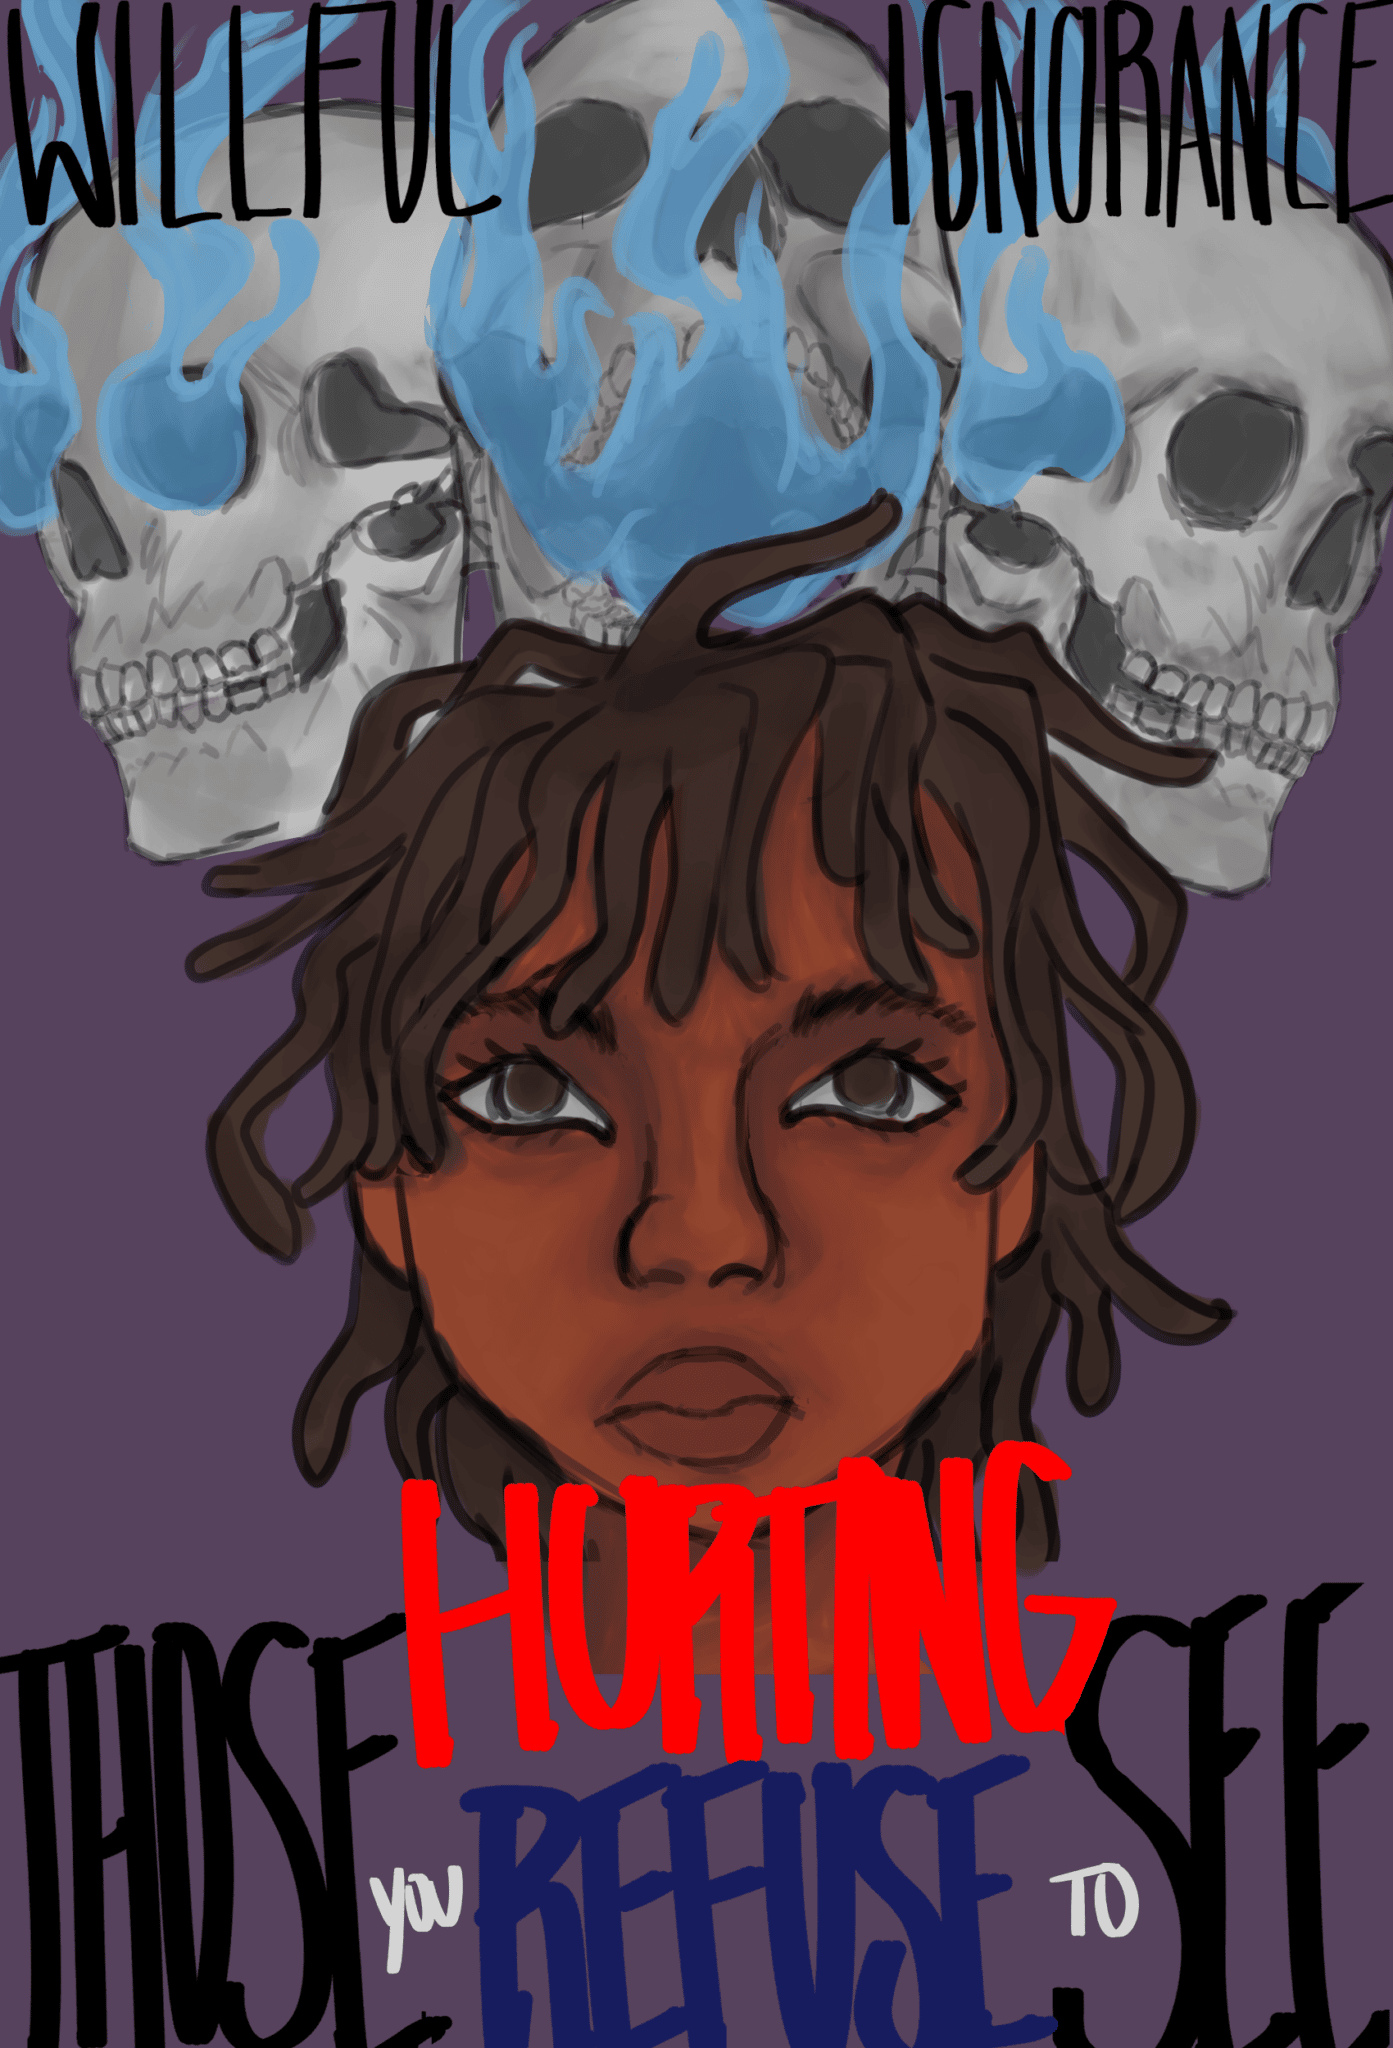 MLK Jr. creative expression contest poster with a purple background, skulls, and a girl on it with the text willful ignorance hurting those you refuse to see